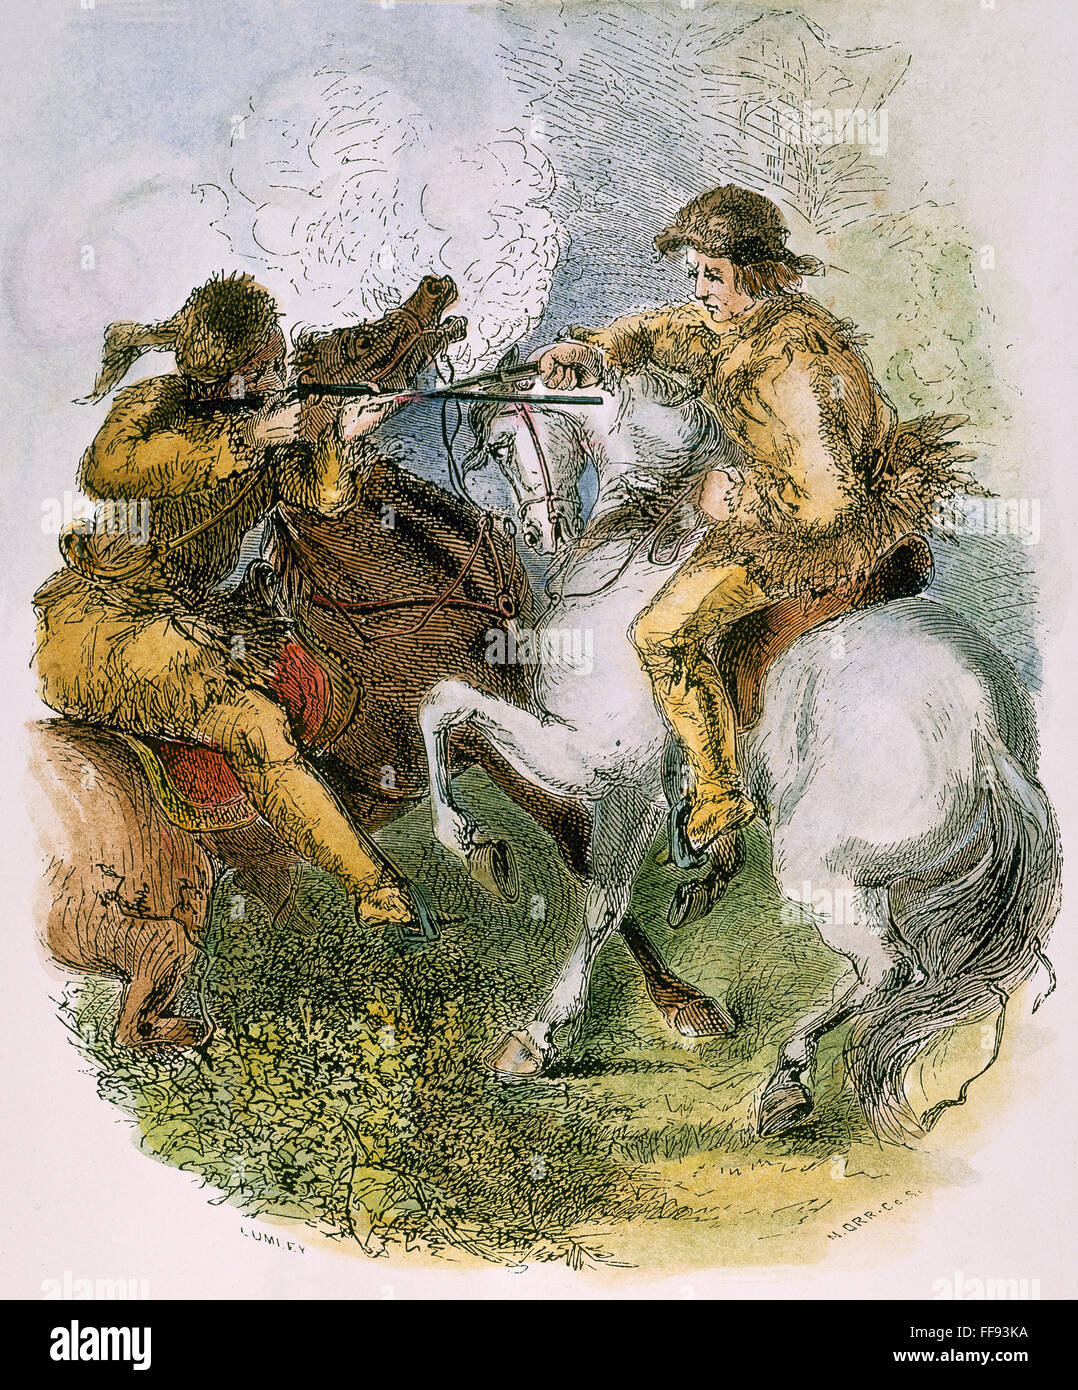 CHRISTOPHER CARSON /n(1809-1868). Known as Kit. American frontiersman. Carson in a scuffle with another rider. Wood engraving from 'The Life & Adventures of Kit Carson, the Nestor of the Rocky Mountains,' by DeWitt Peters, New York, 1858. Stock Photo